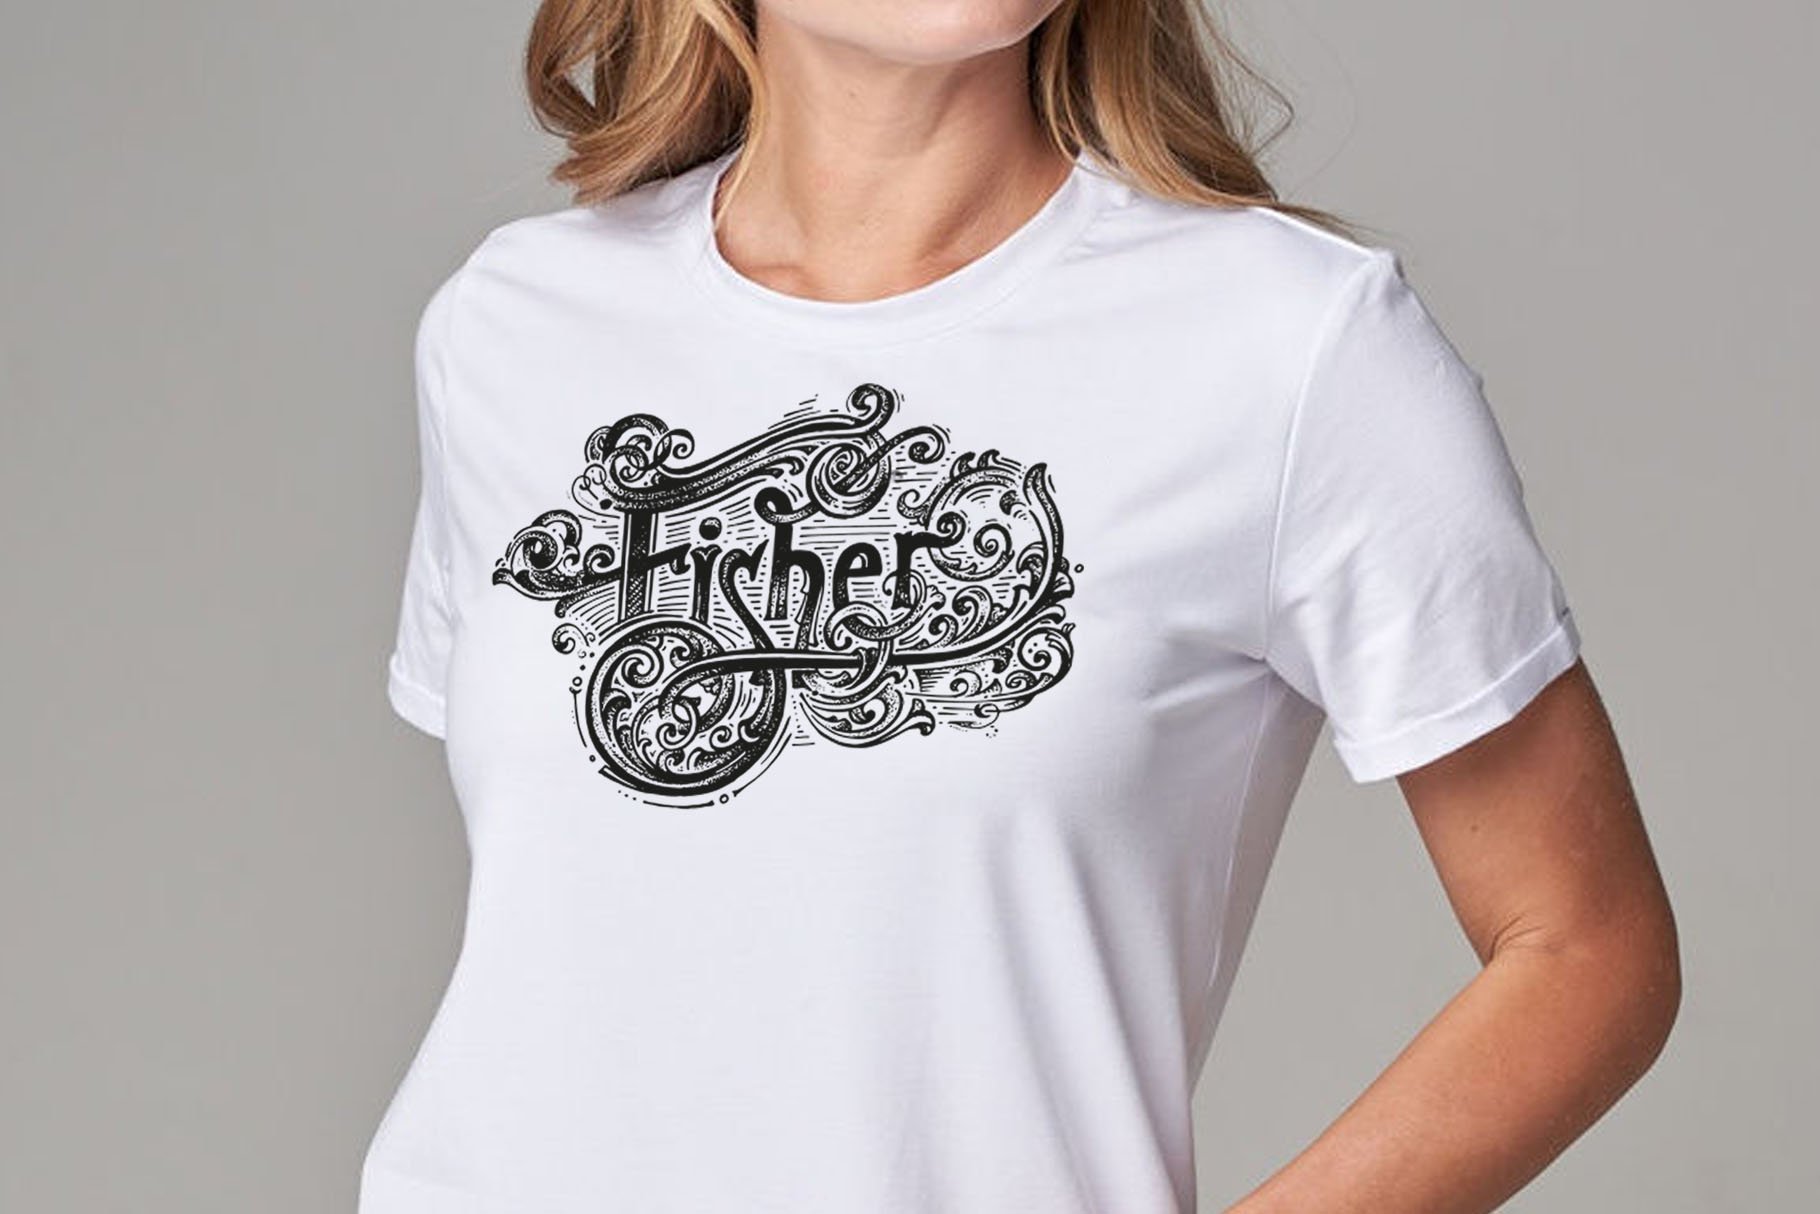 Classic white t-shirt with black fisher illustration.